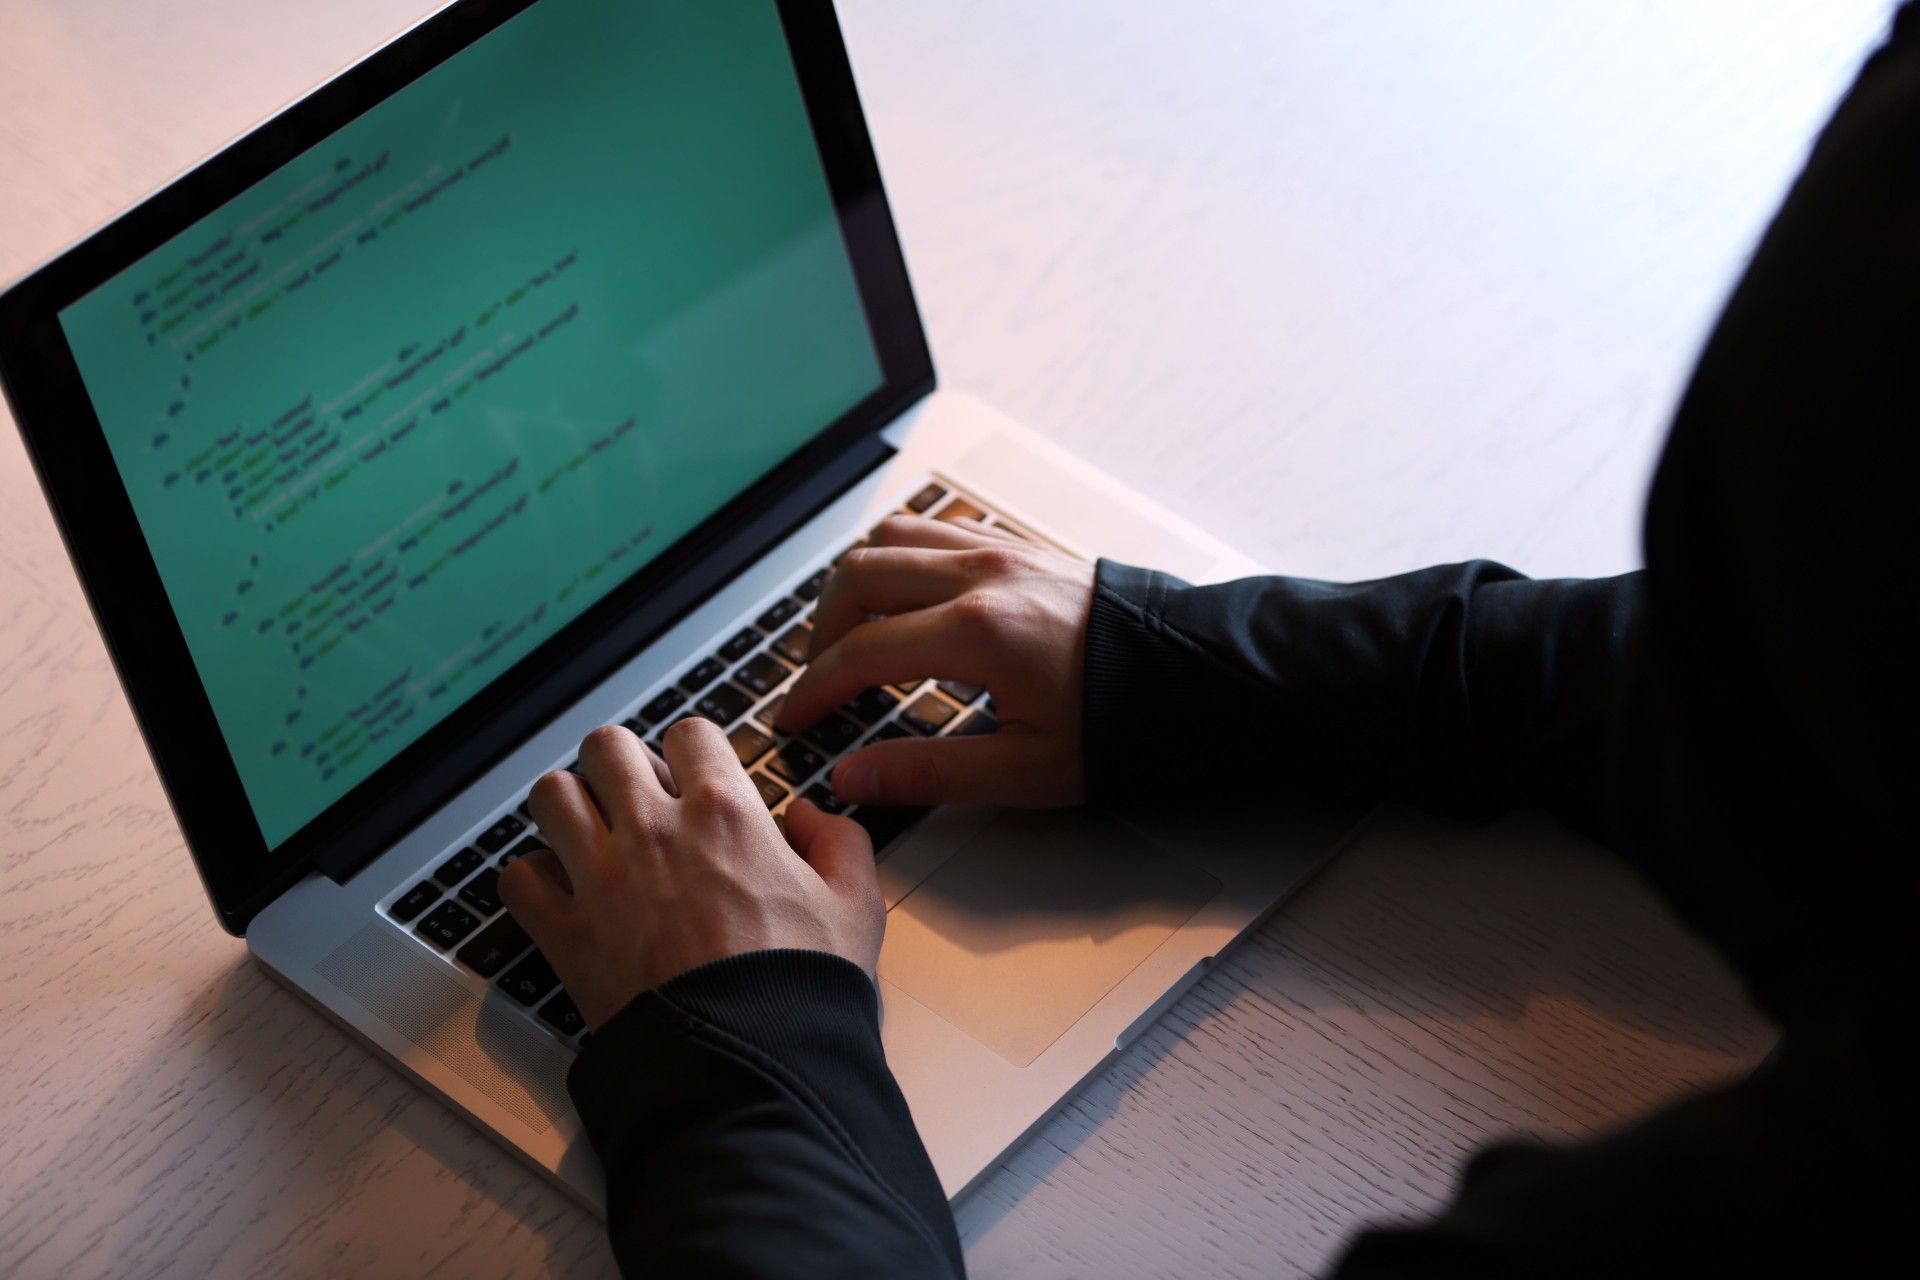 A hacker in a hoodie uses a laptop - loqbox